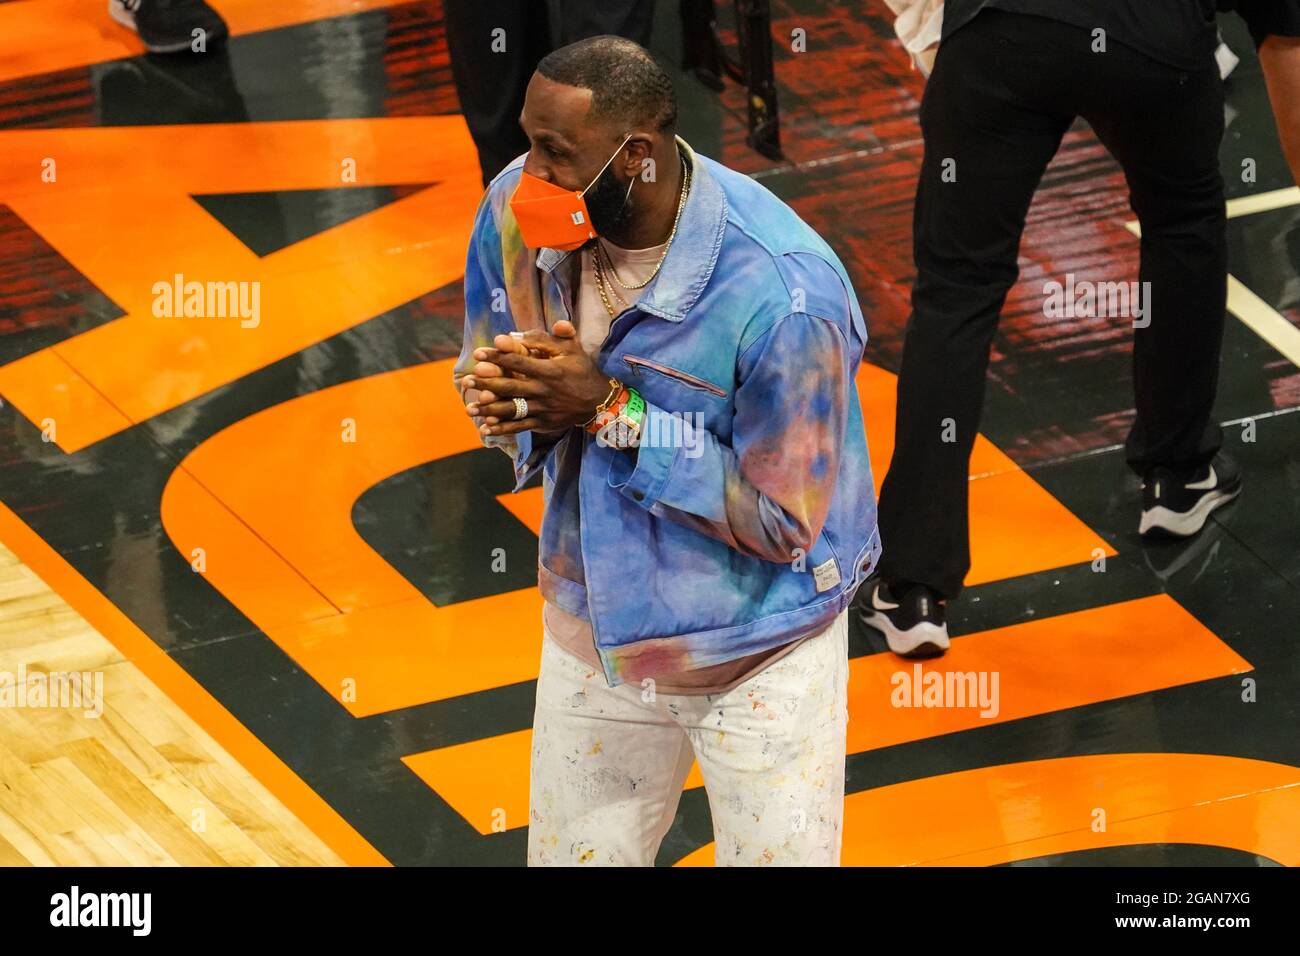 Orlando, Florida, USA, March 26, 2021, Los Angeles Lakers Small Forward LeBron James at the Amway Center  (Photo Credit:  Marty Jean-Louis) Stock Photo